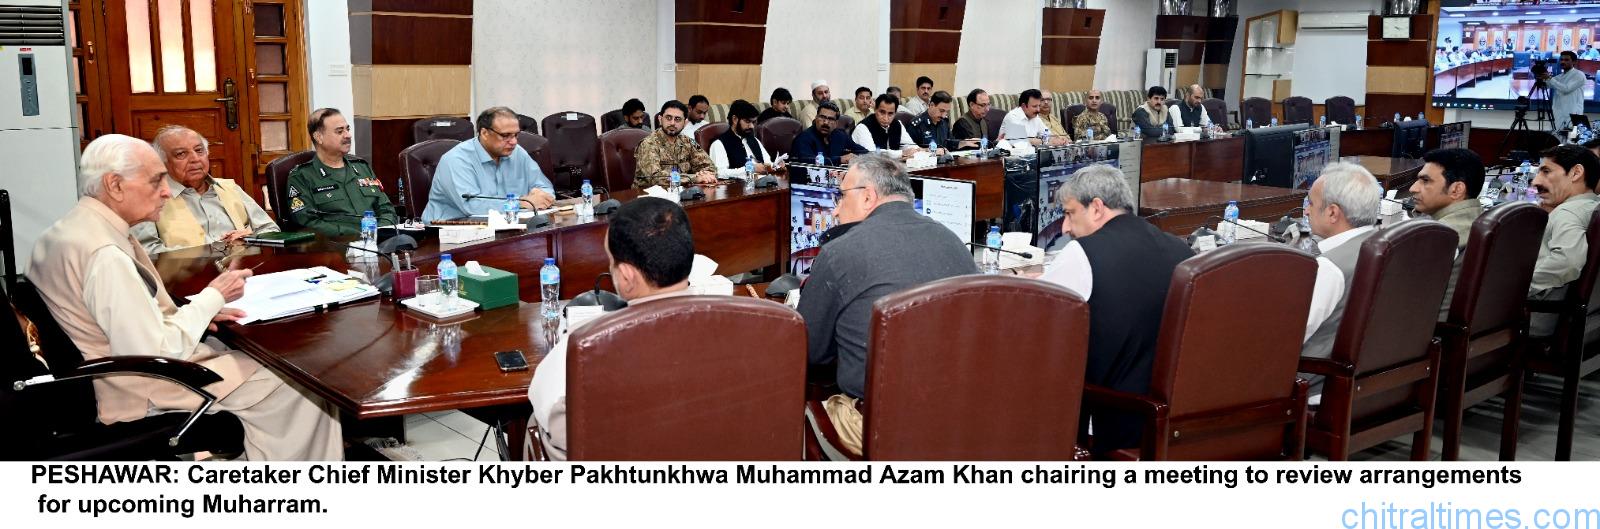 chitraltimes caretaker cm kp azam khan chairing law and order situation in the province